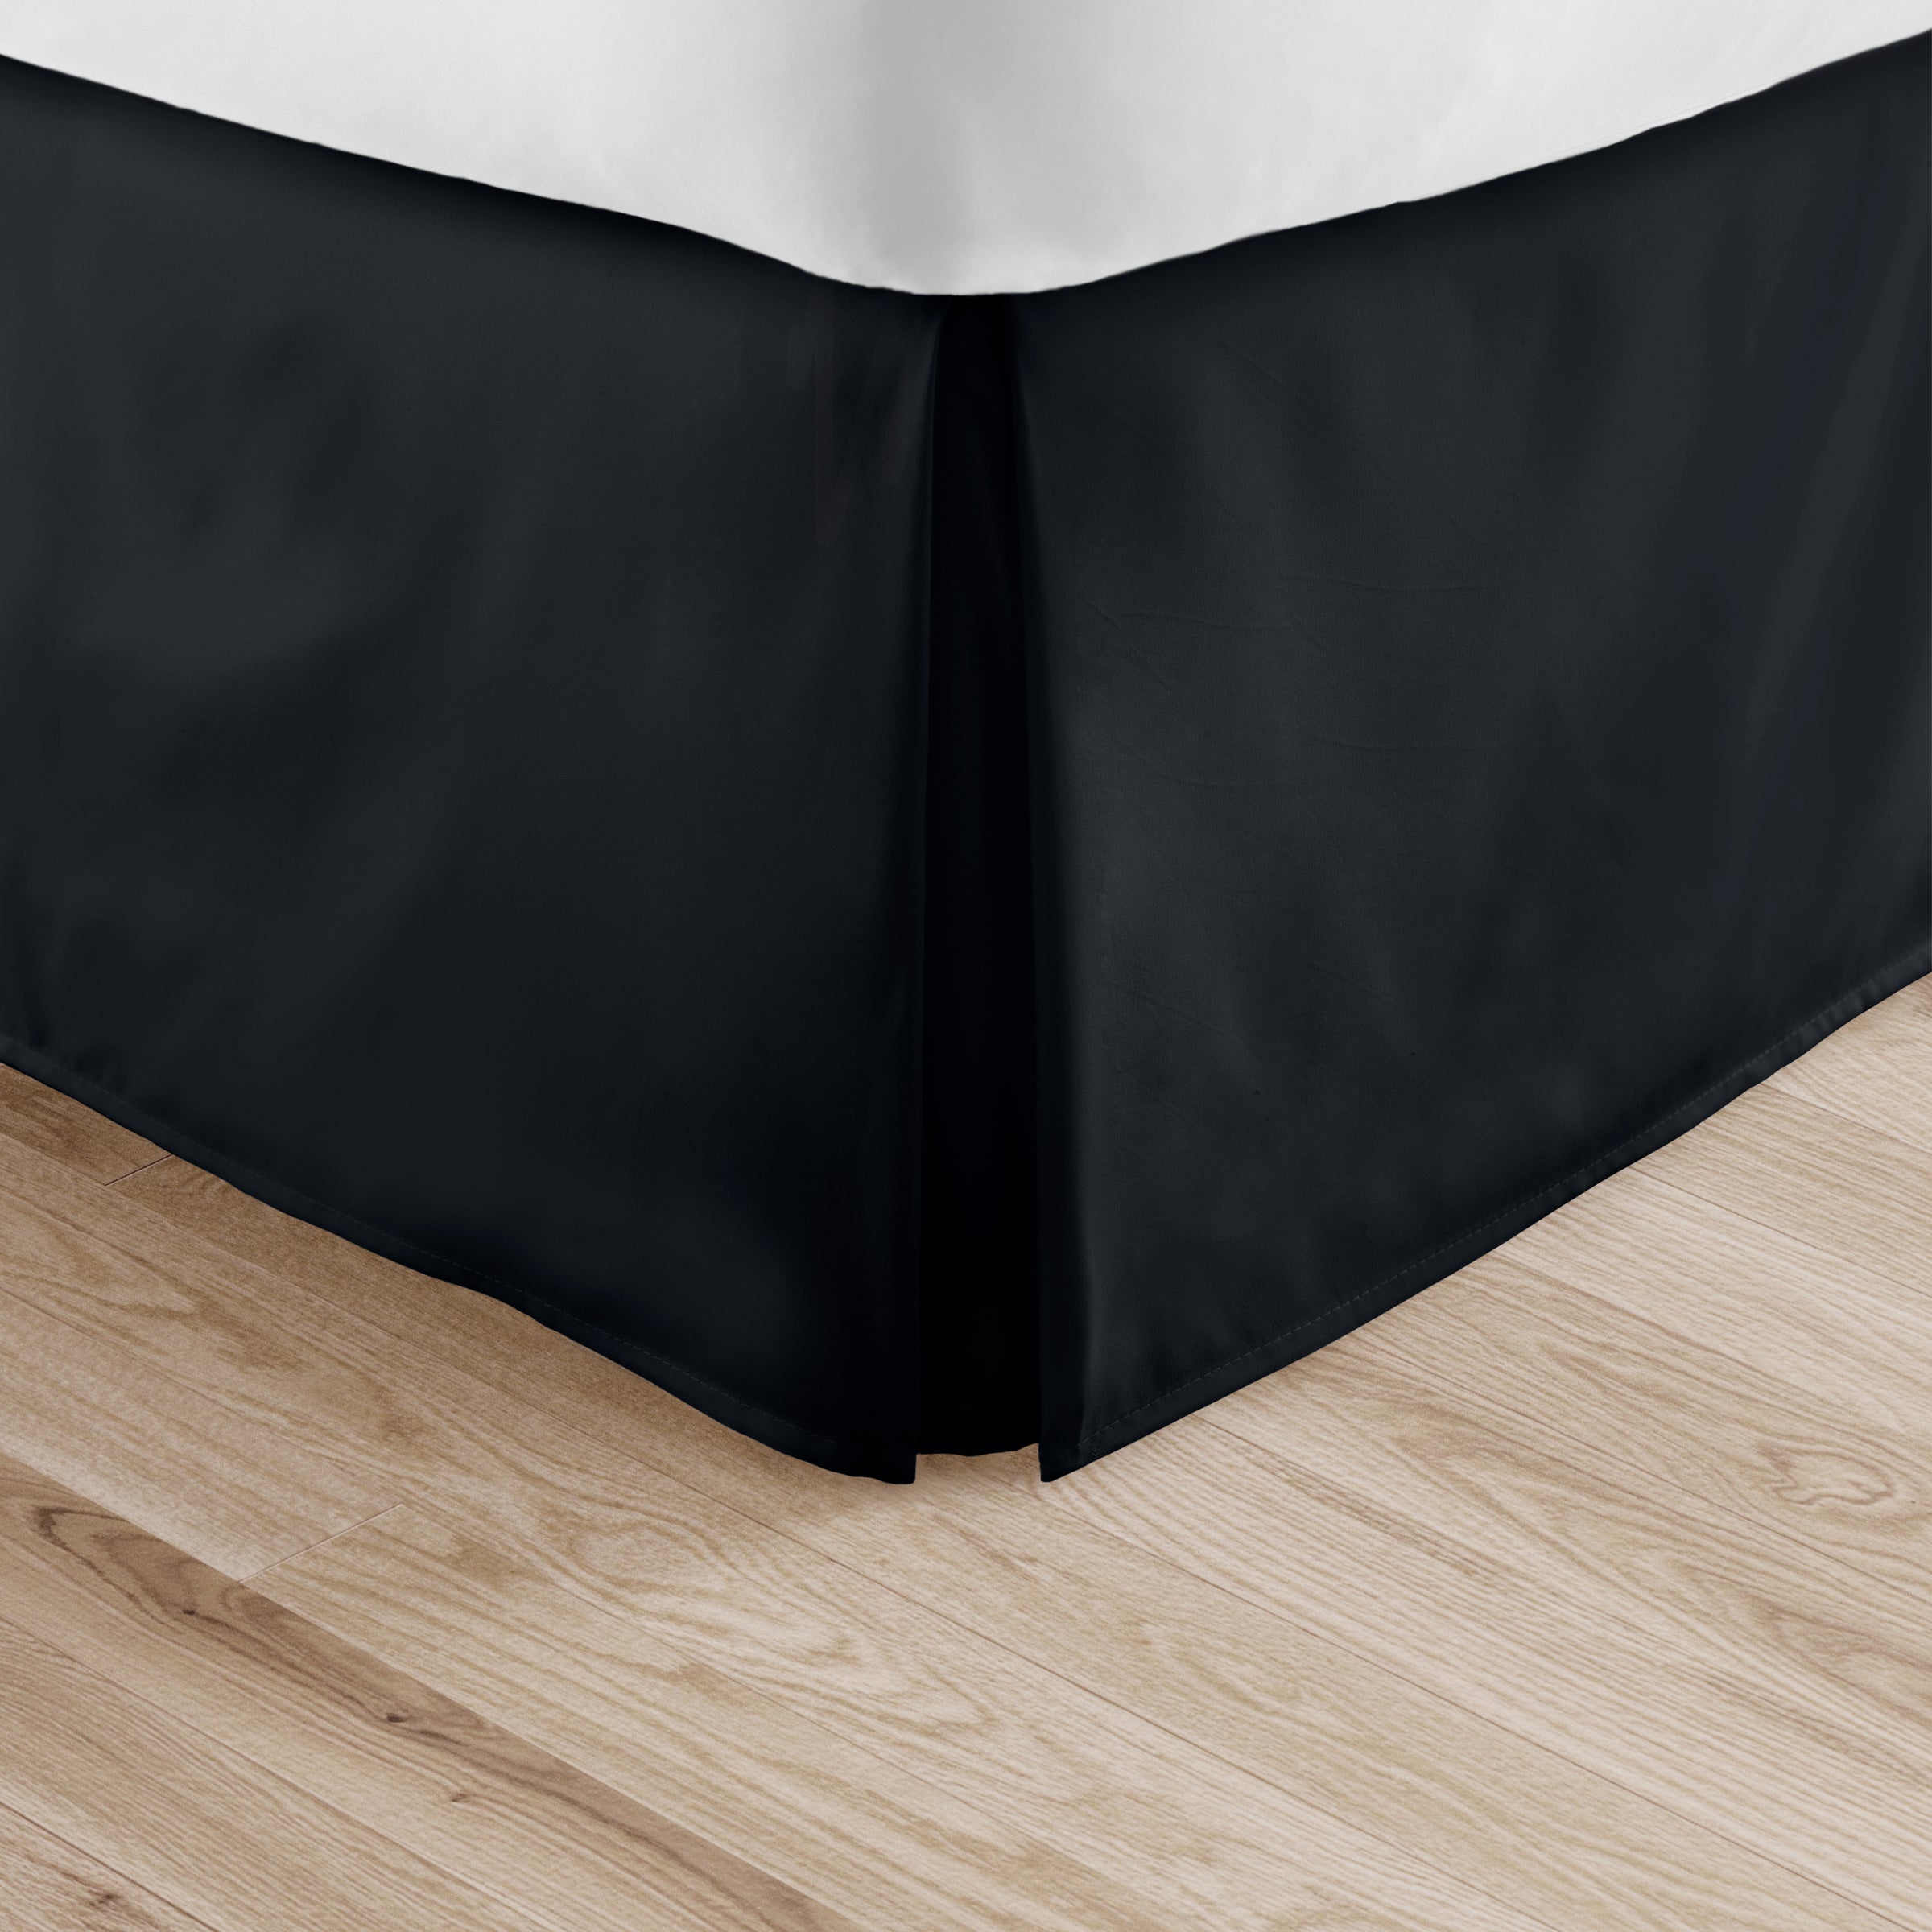 Wrap Around Bed Skirts With Center & Corner Pleats, Dust Ruffle